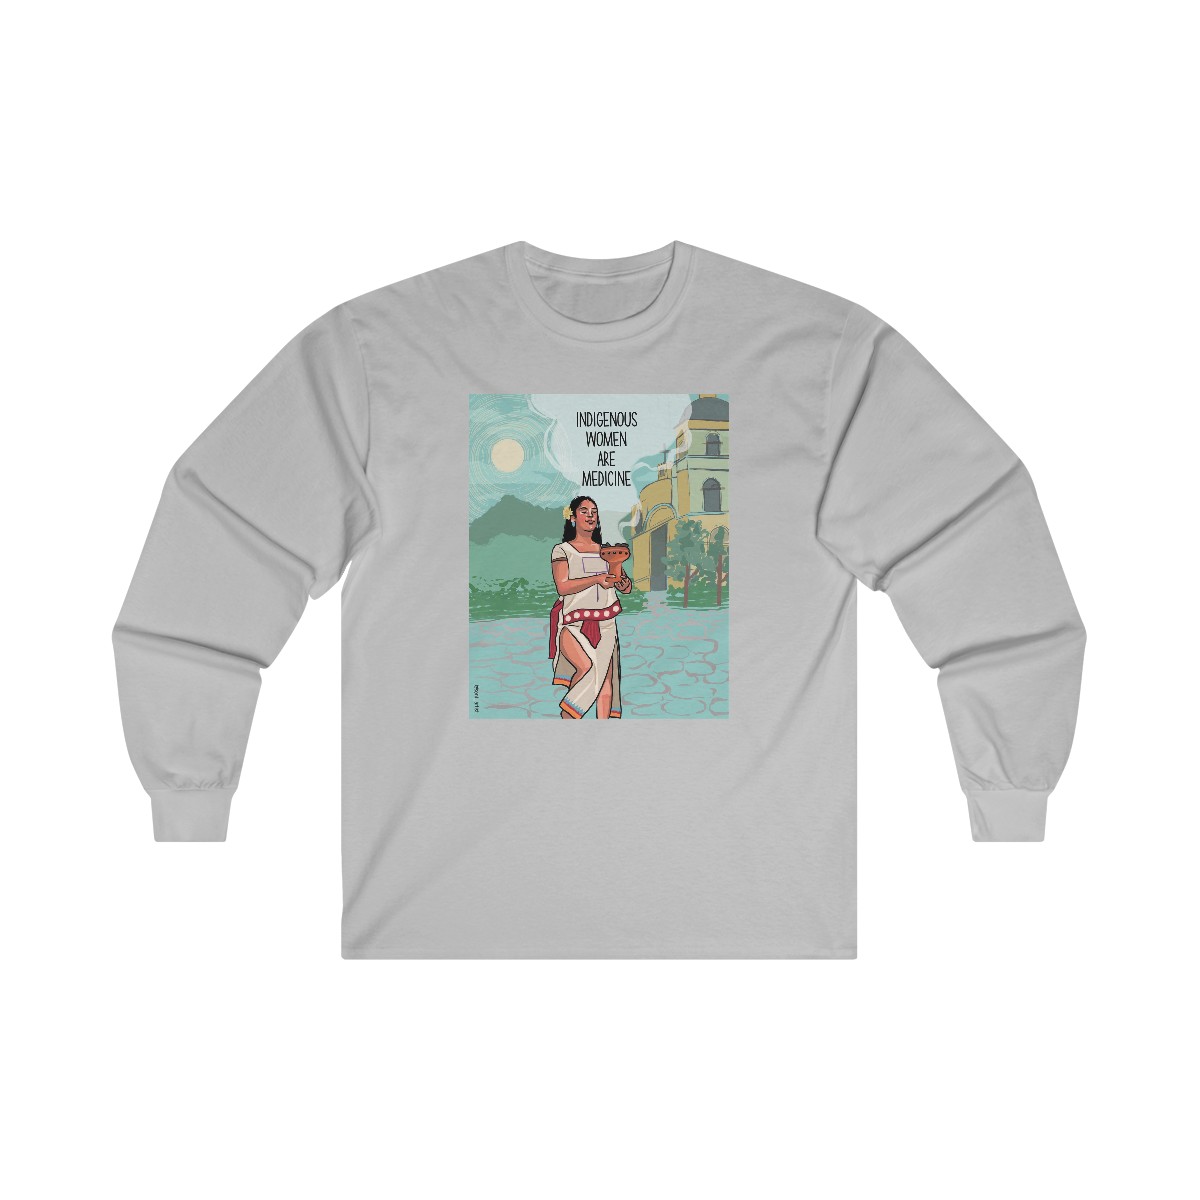 "Indigenous women are medicine" Ultra Cotton Long Sleeve Tee product thumbnail image